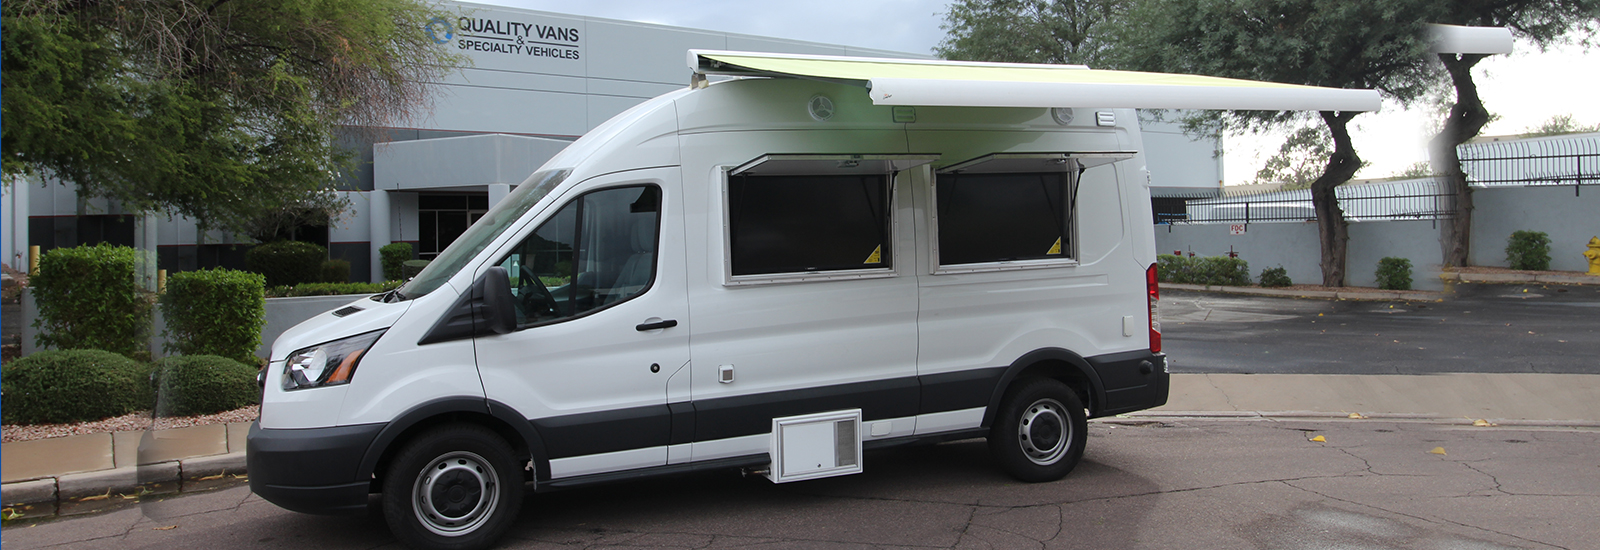 quality vans and specialty vehicles